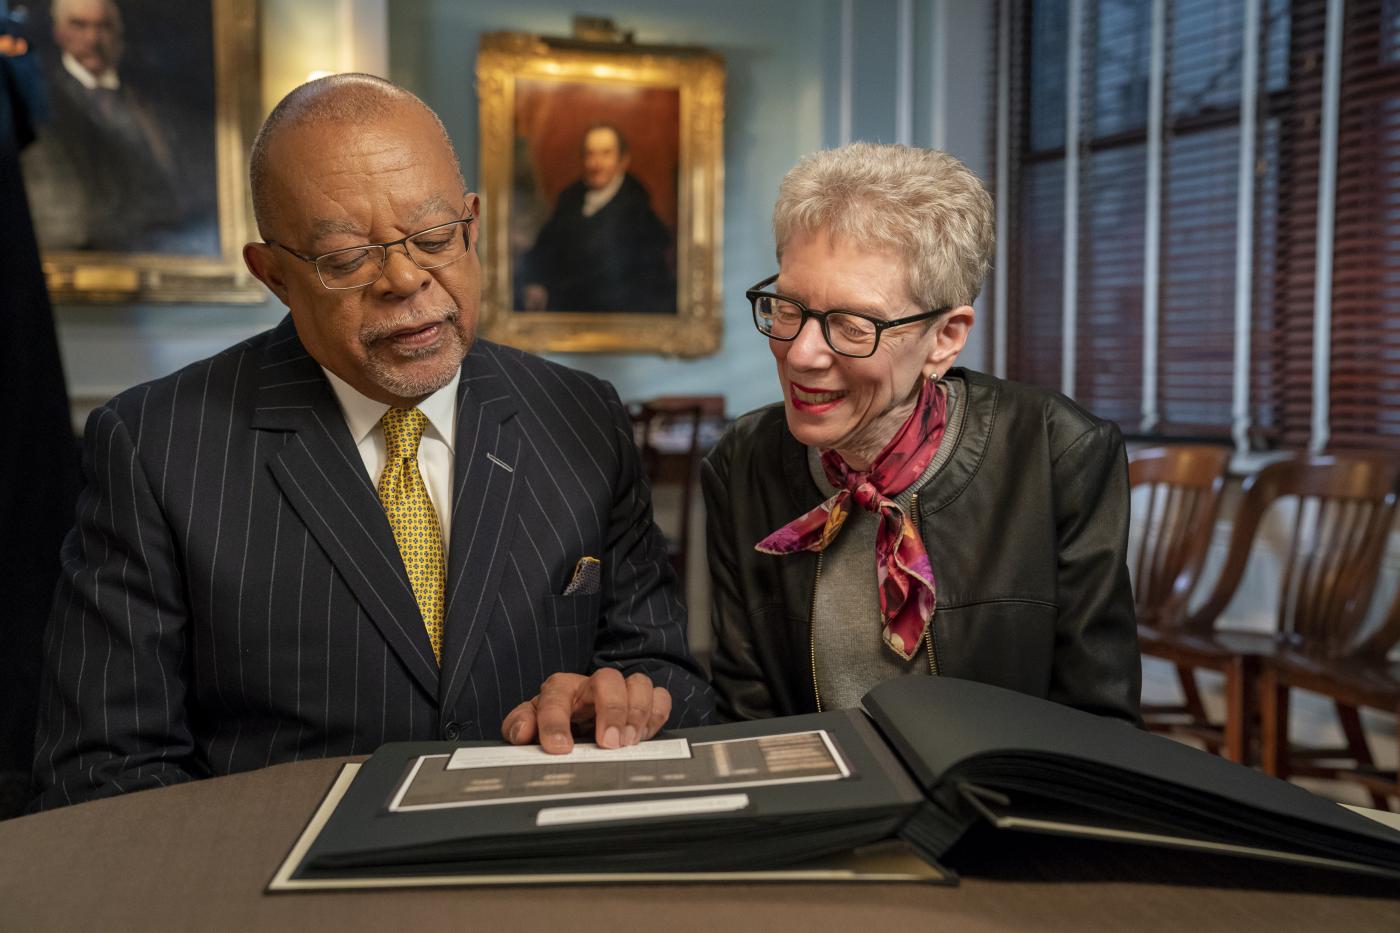 Dr. Gates looks at a book with Terry Gross.